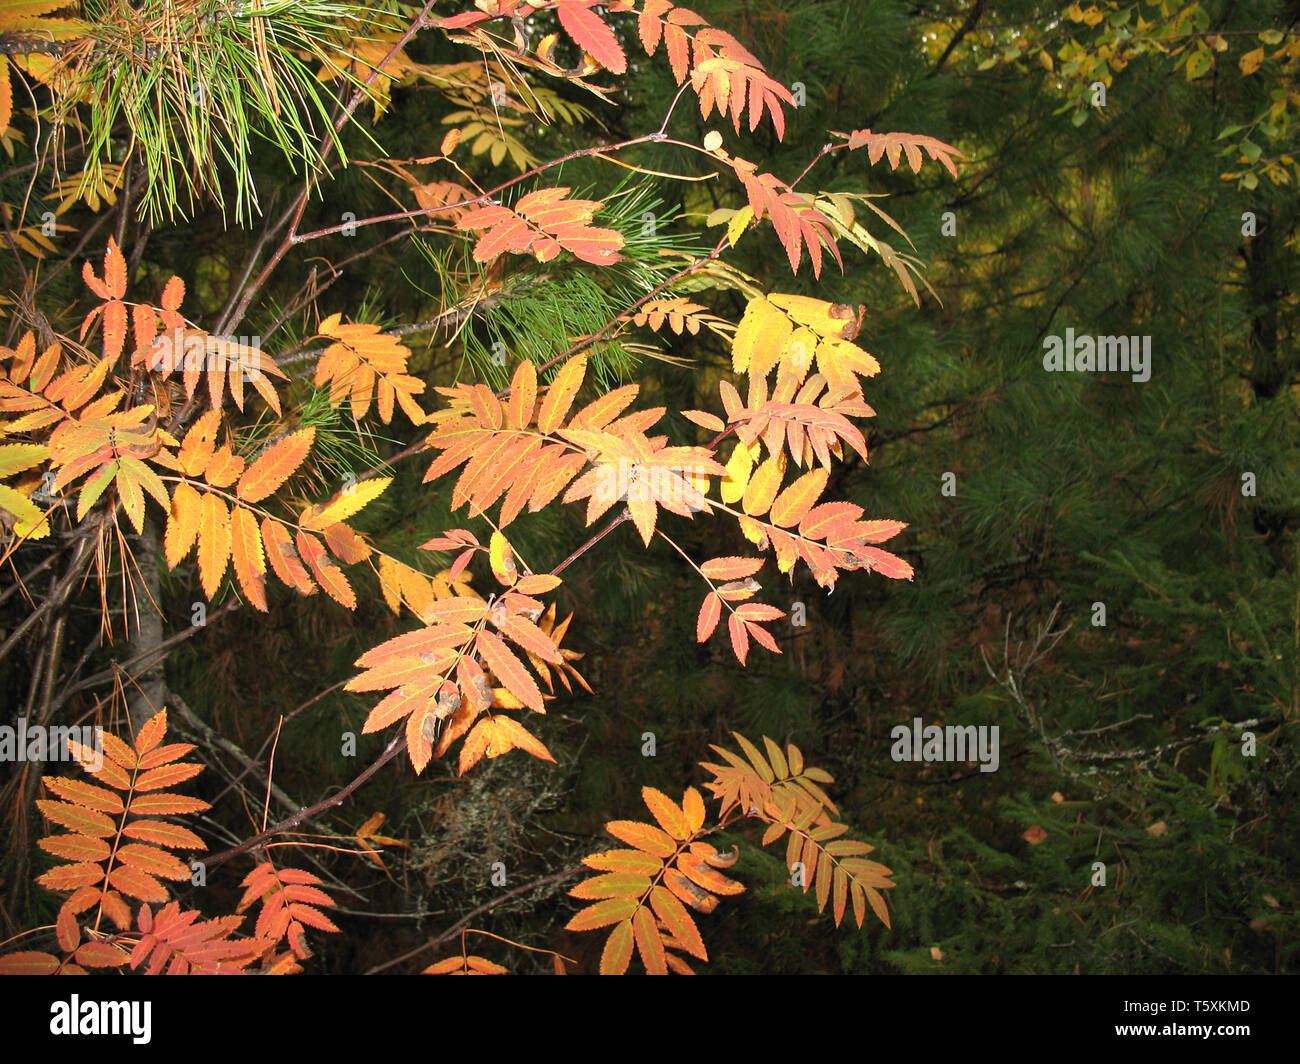 Red in green. Autumn in forest. Stock Photo